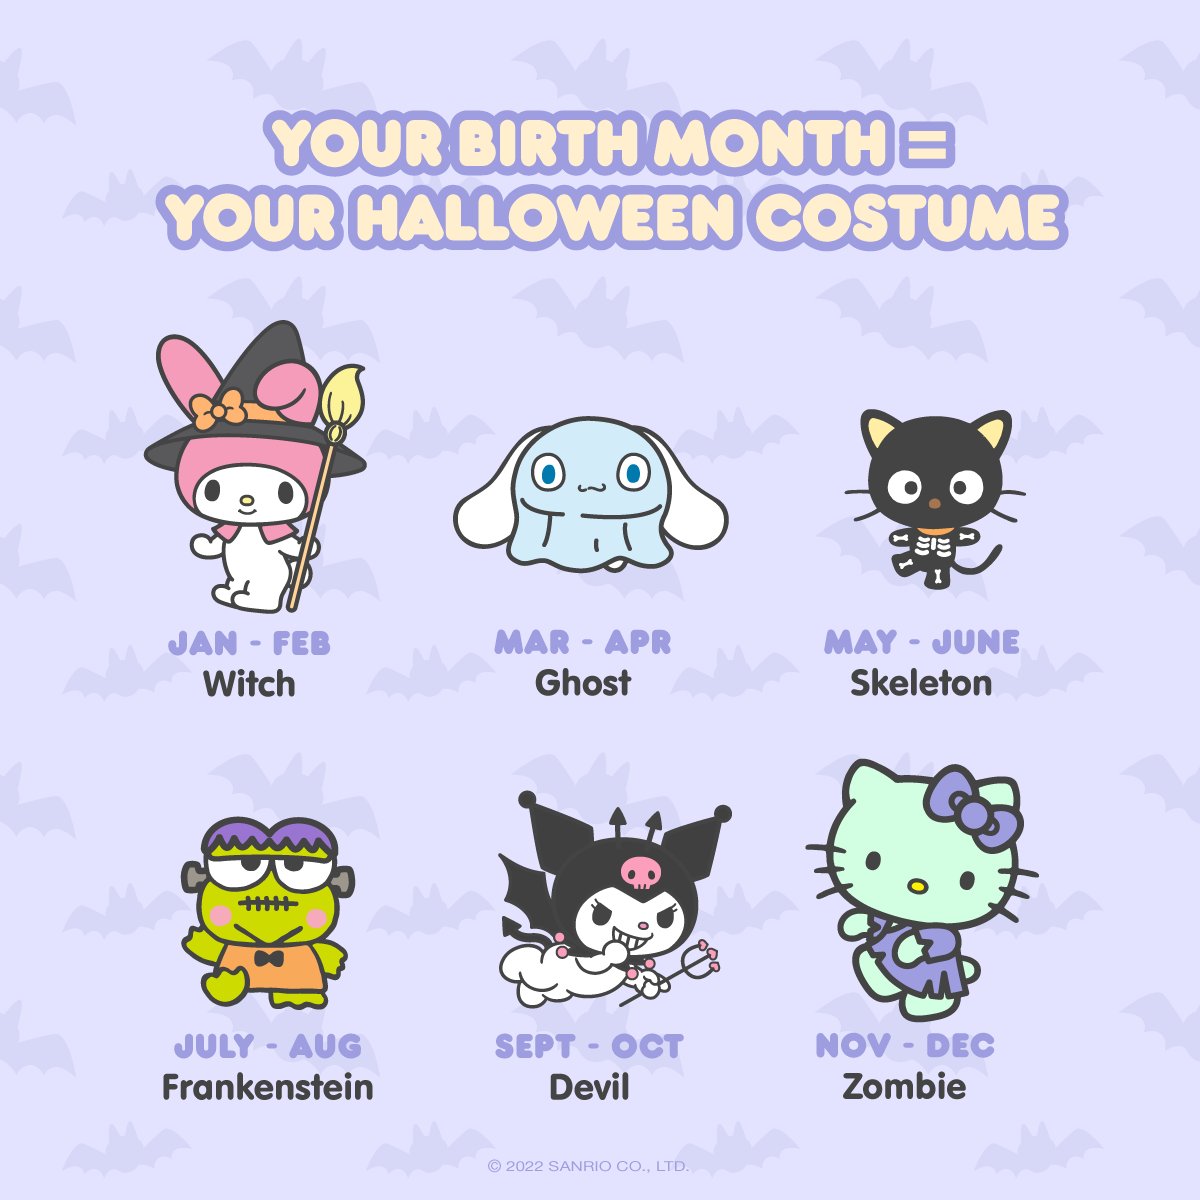 Sanrio on Twitter: "What will your Halloween costume be this year? 👻✨  https://t.co/Wpod1h6OgO" / Twitter